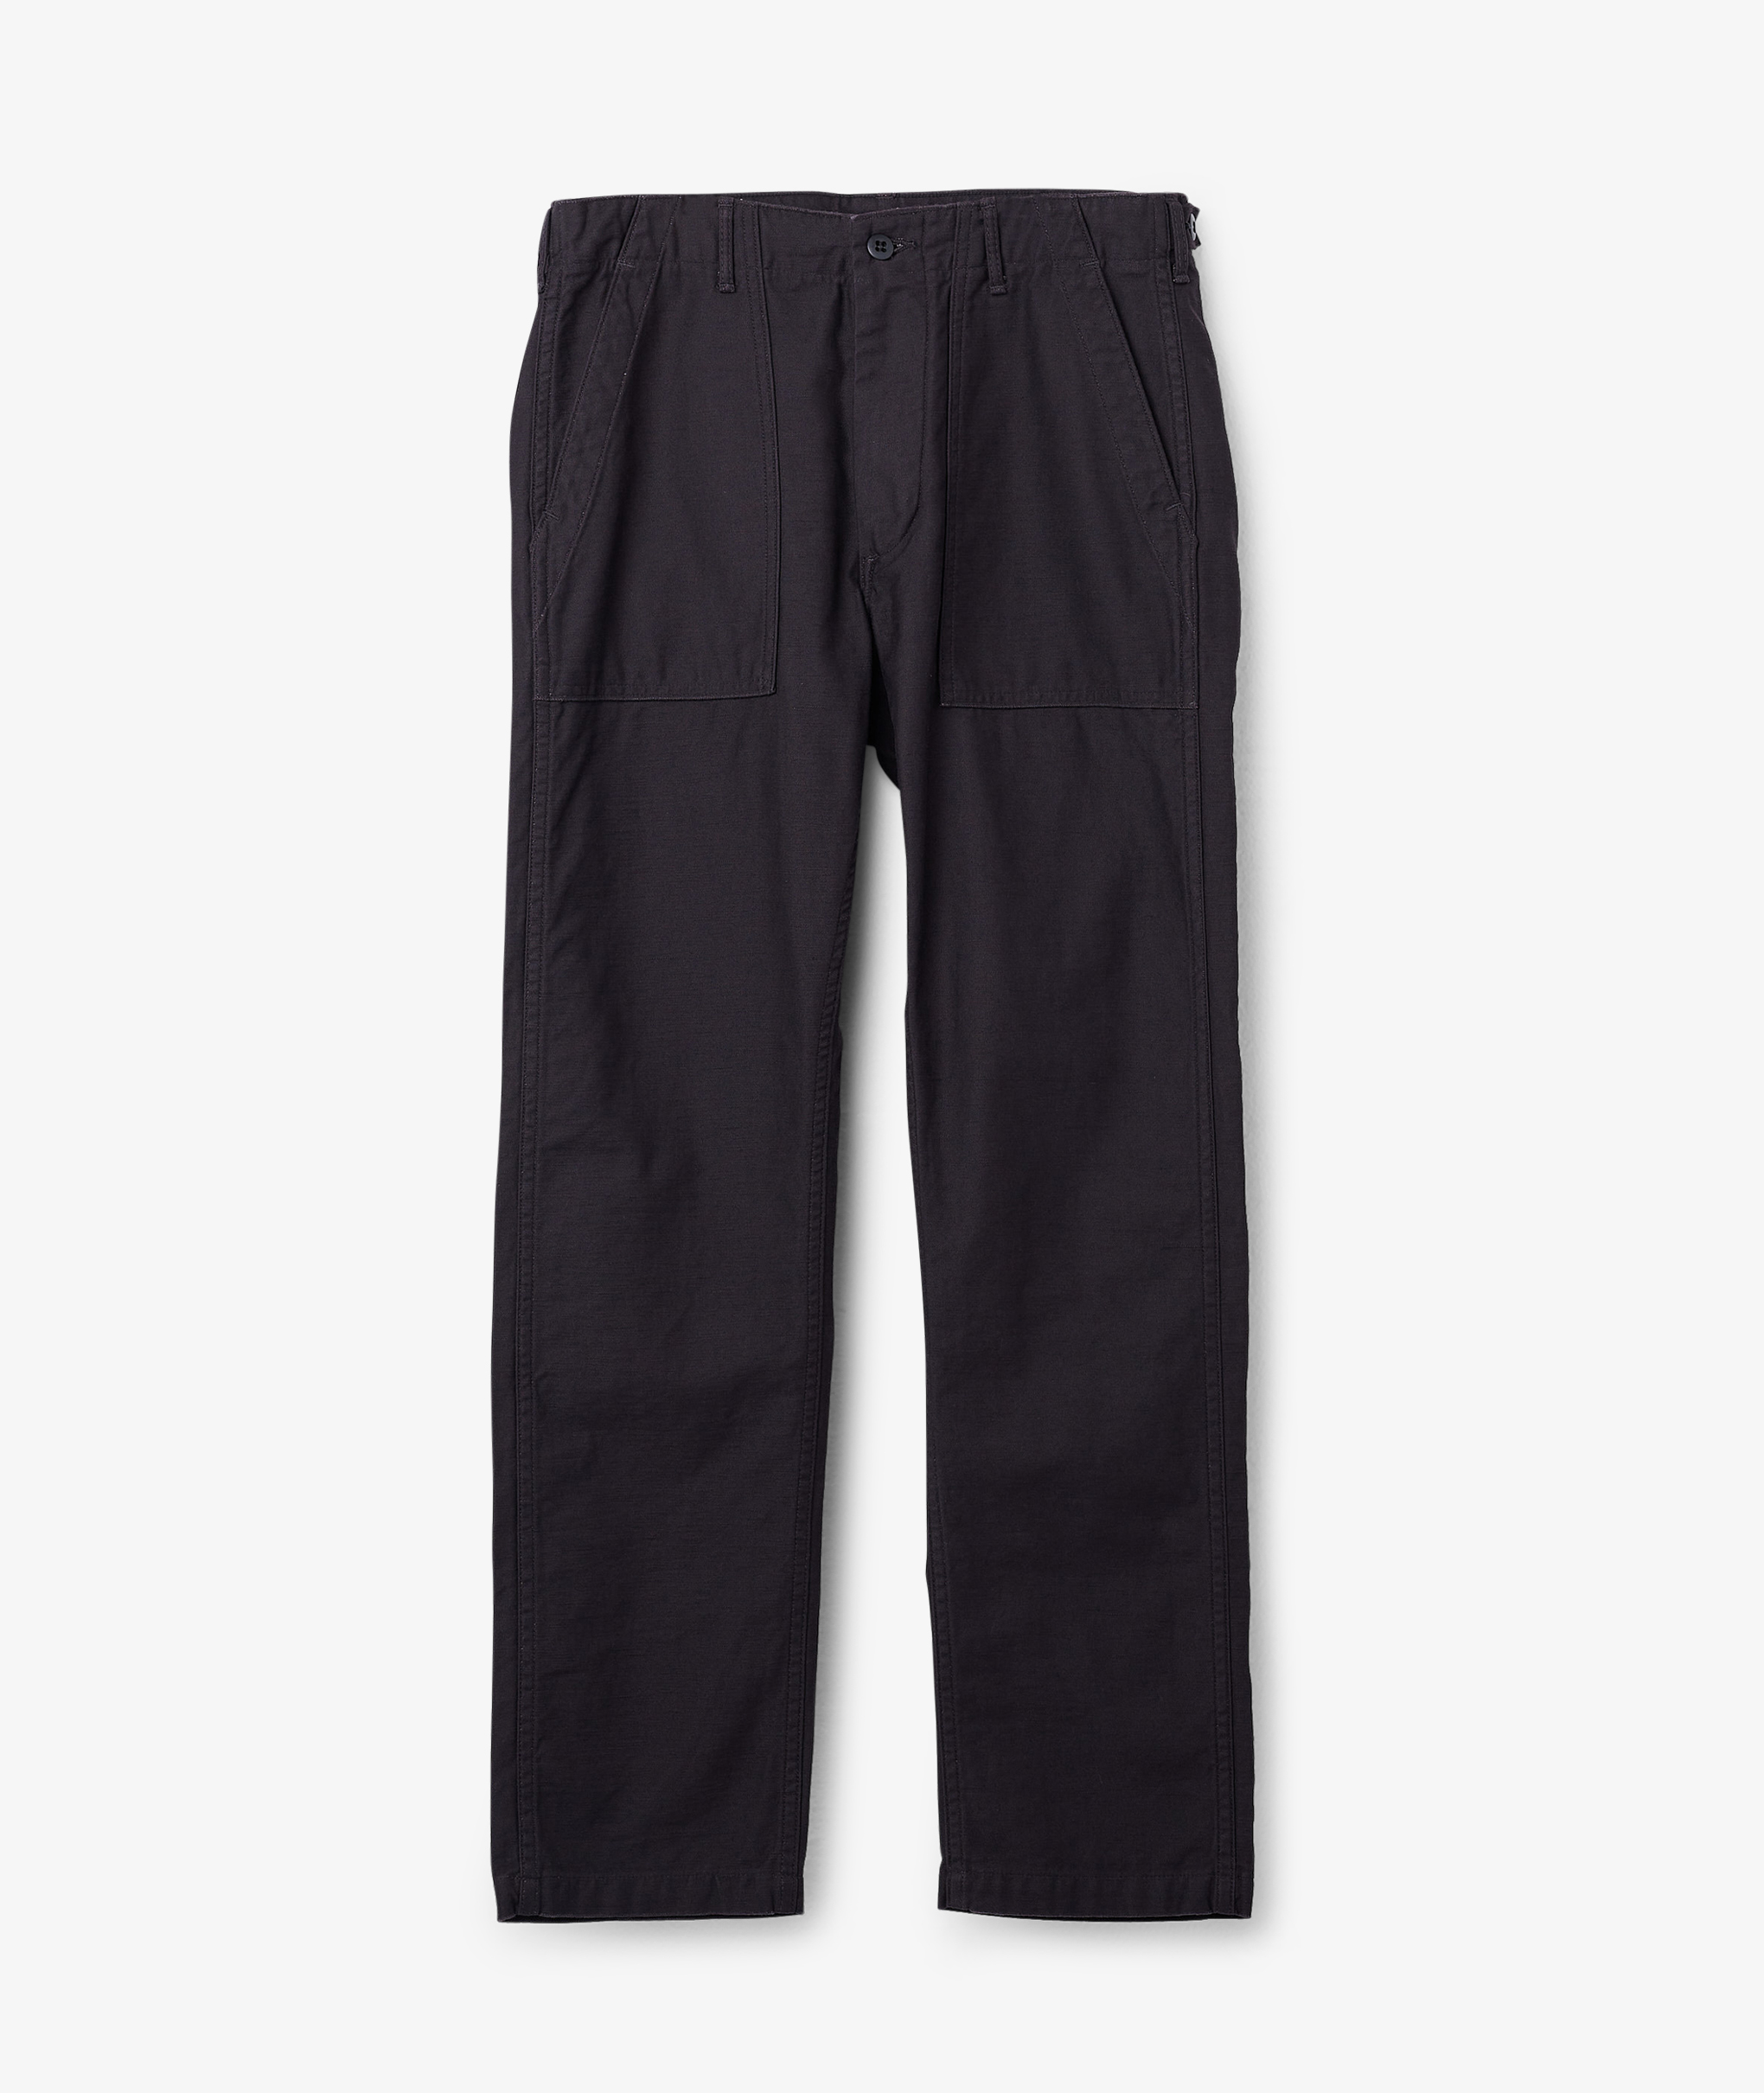 Norse Store | Shipping Worldwide - orSlow SLIM FIT FATIGUE PANTS - Black